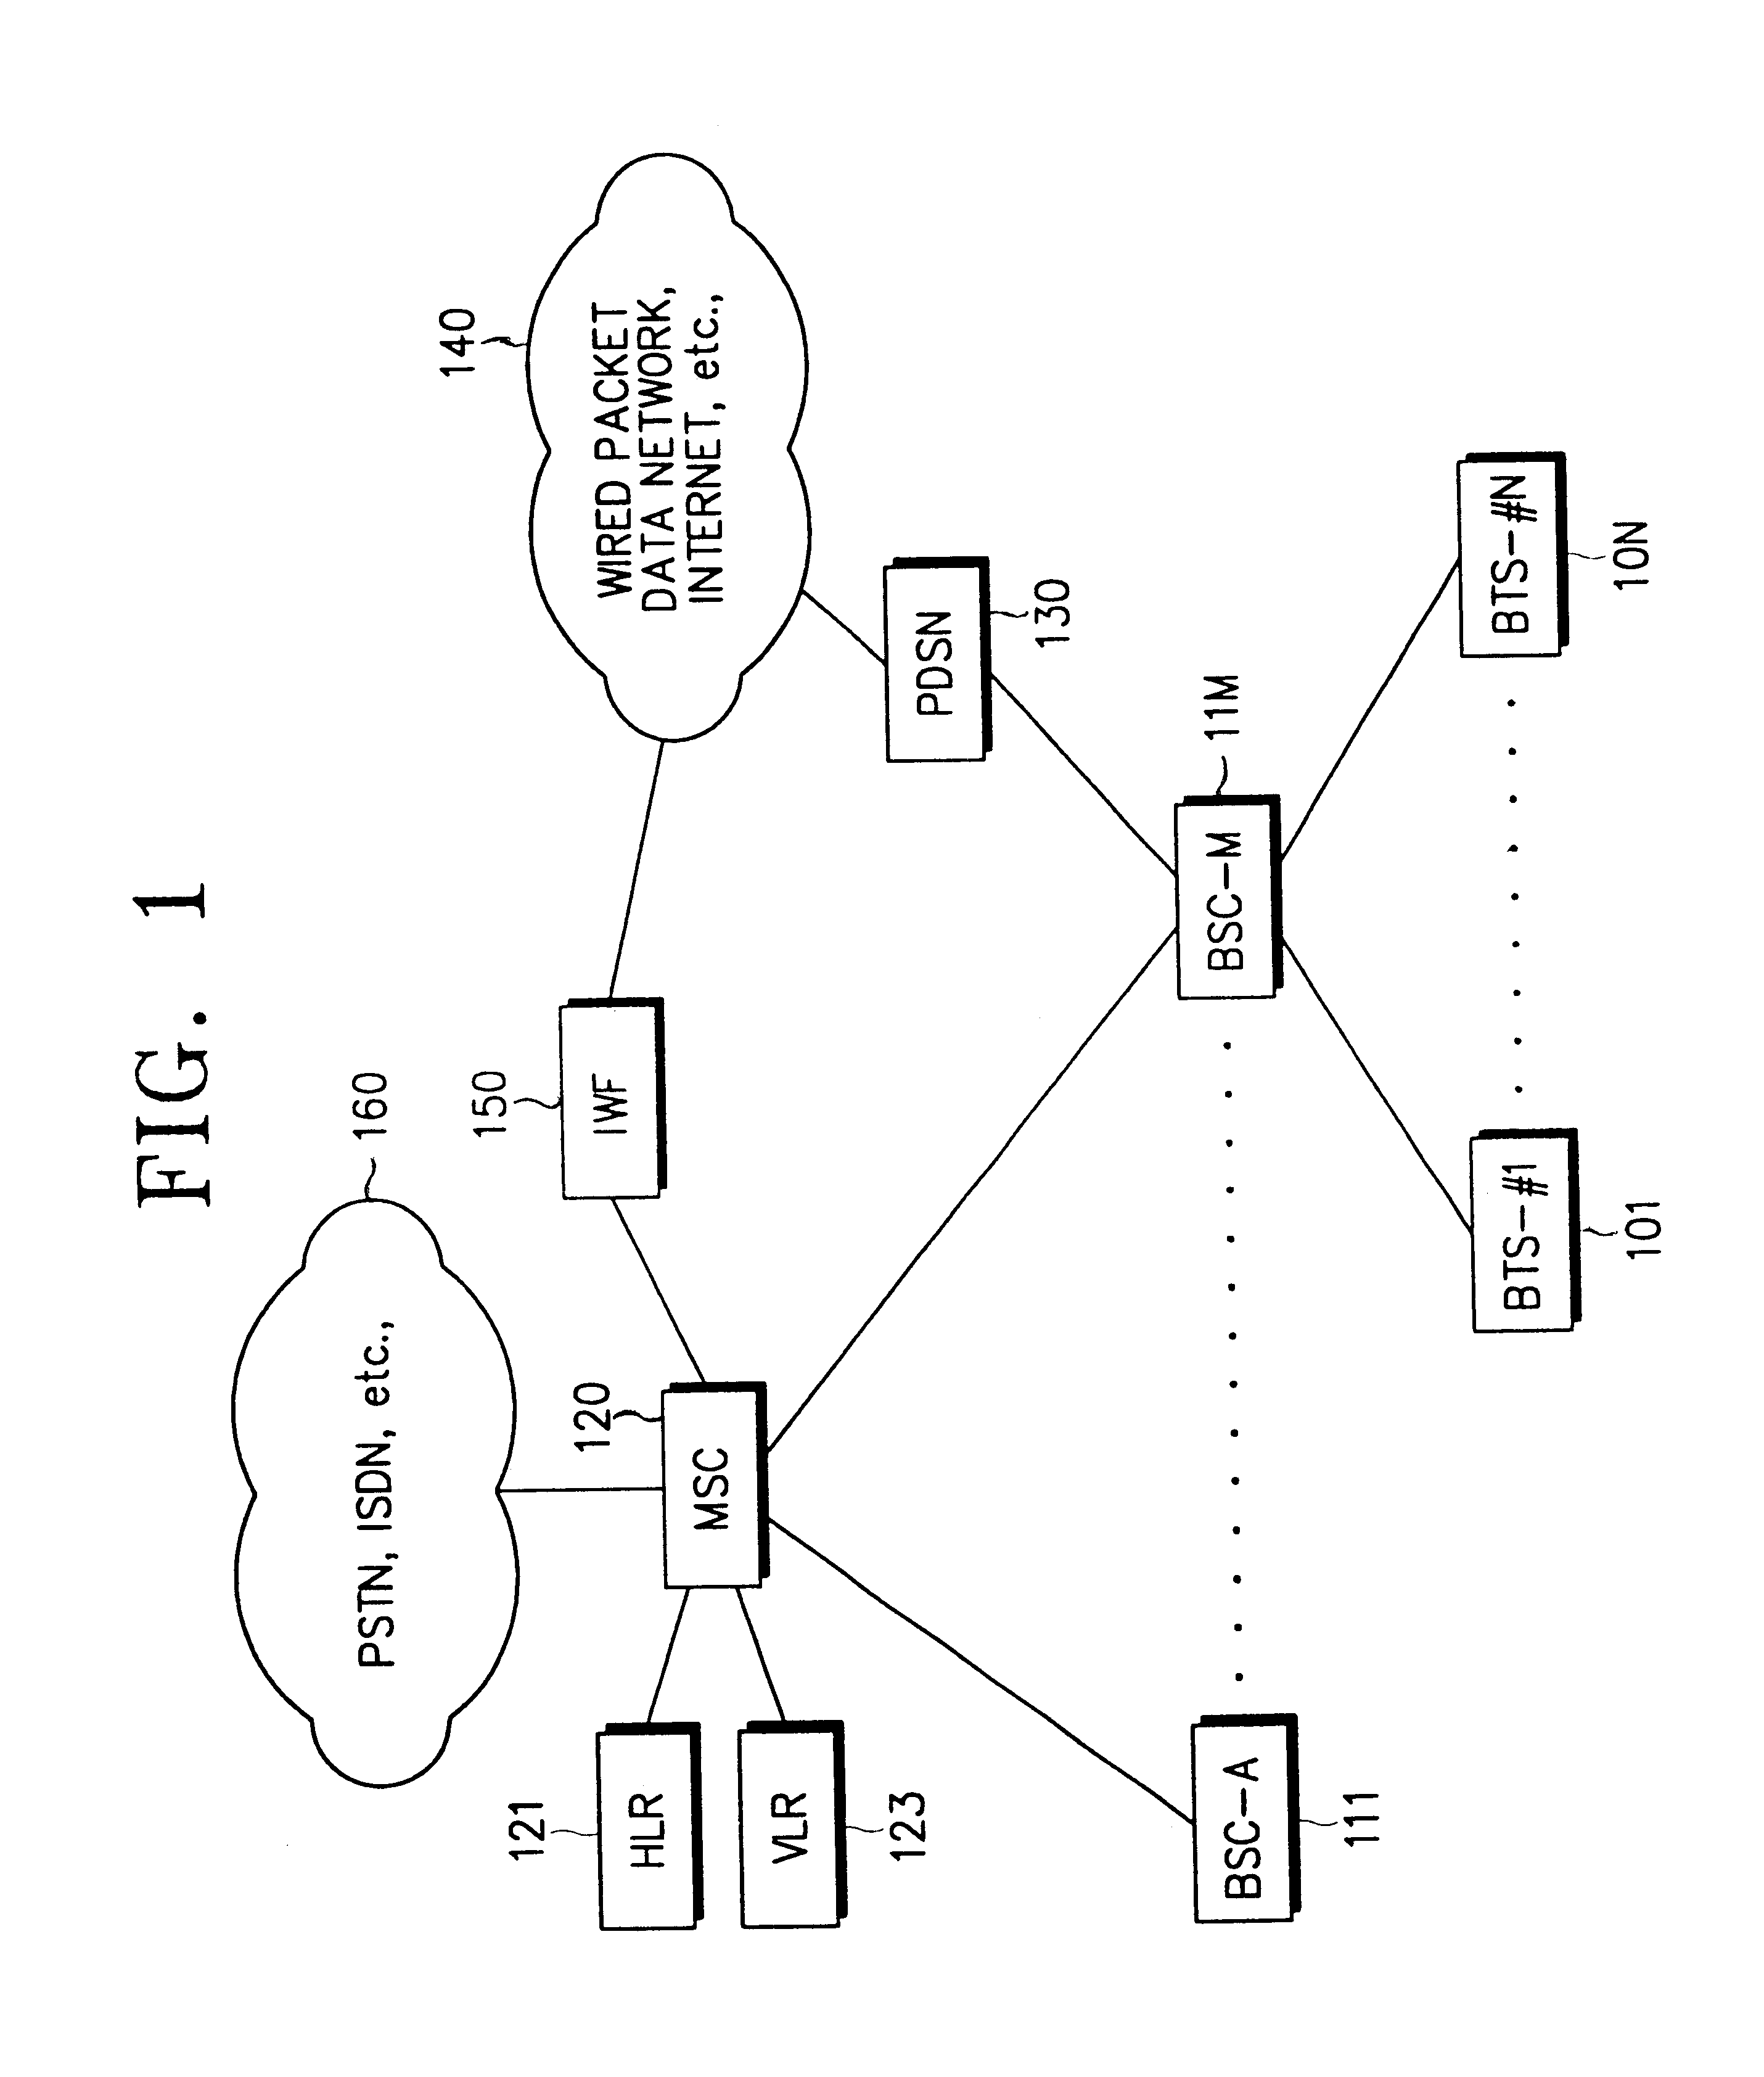 Scheduling apparatus and method for packet data service in a wireless communication system